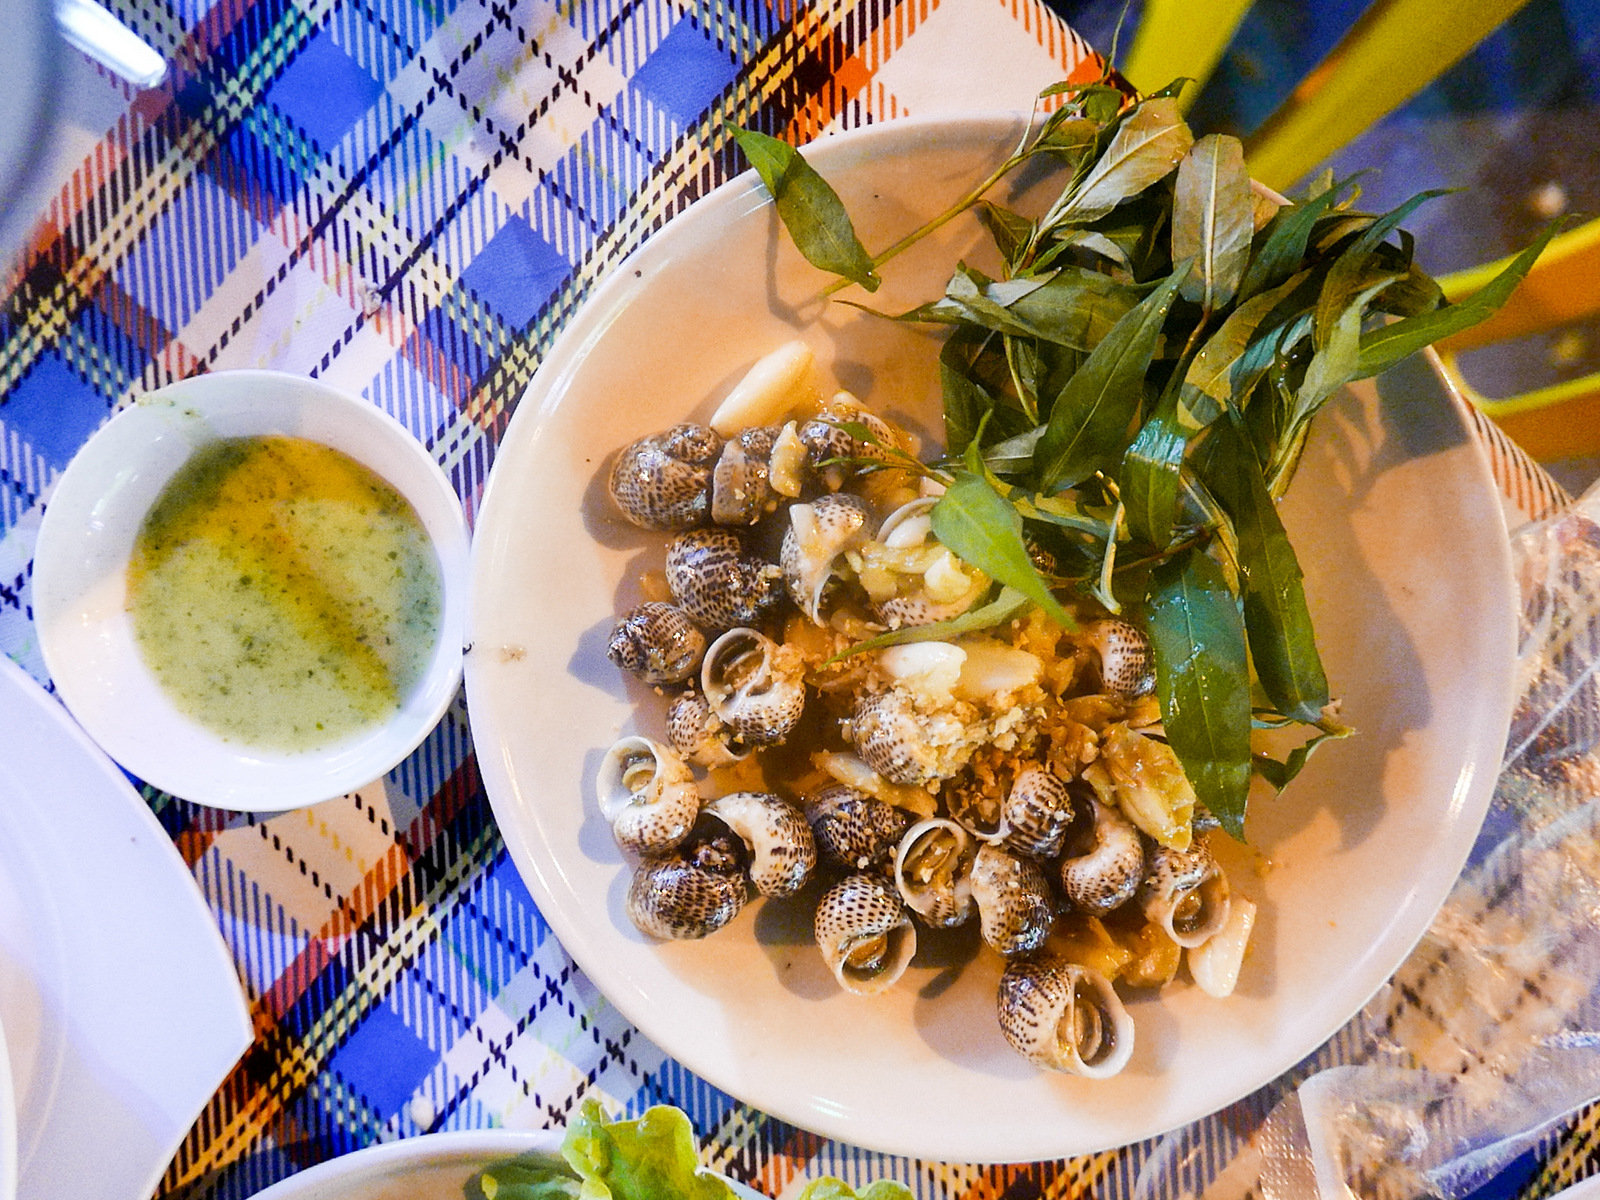 3. Saigon Station - sea snails with butter and garlic